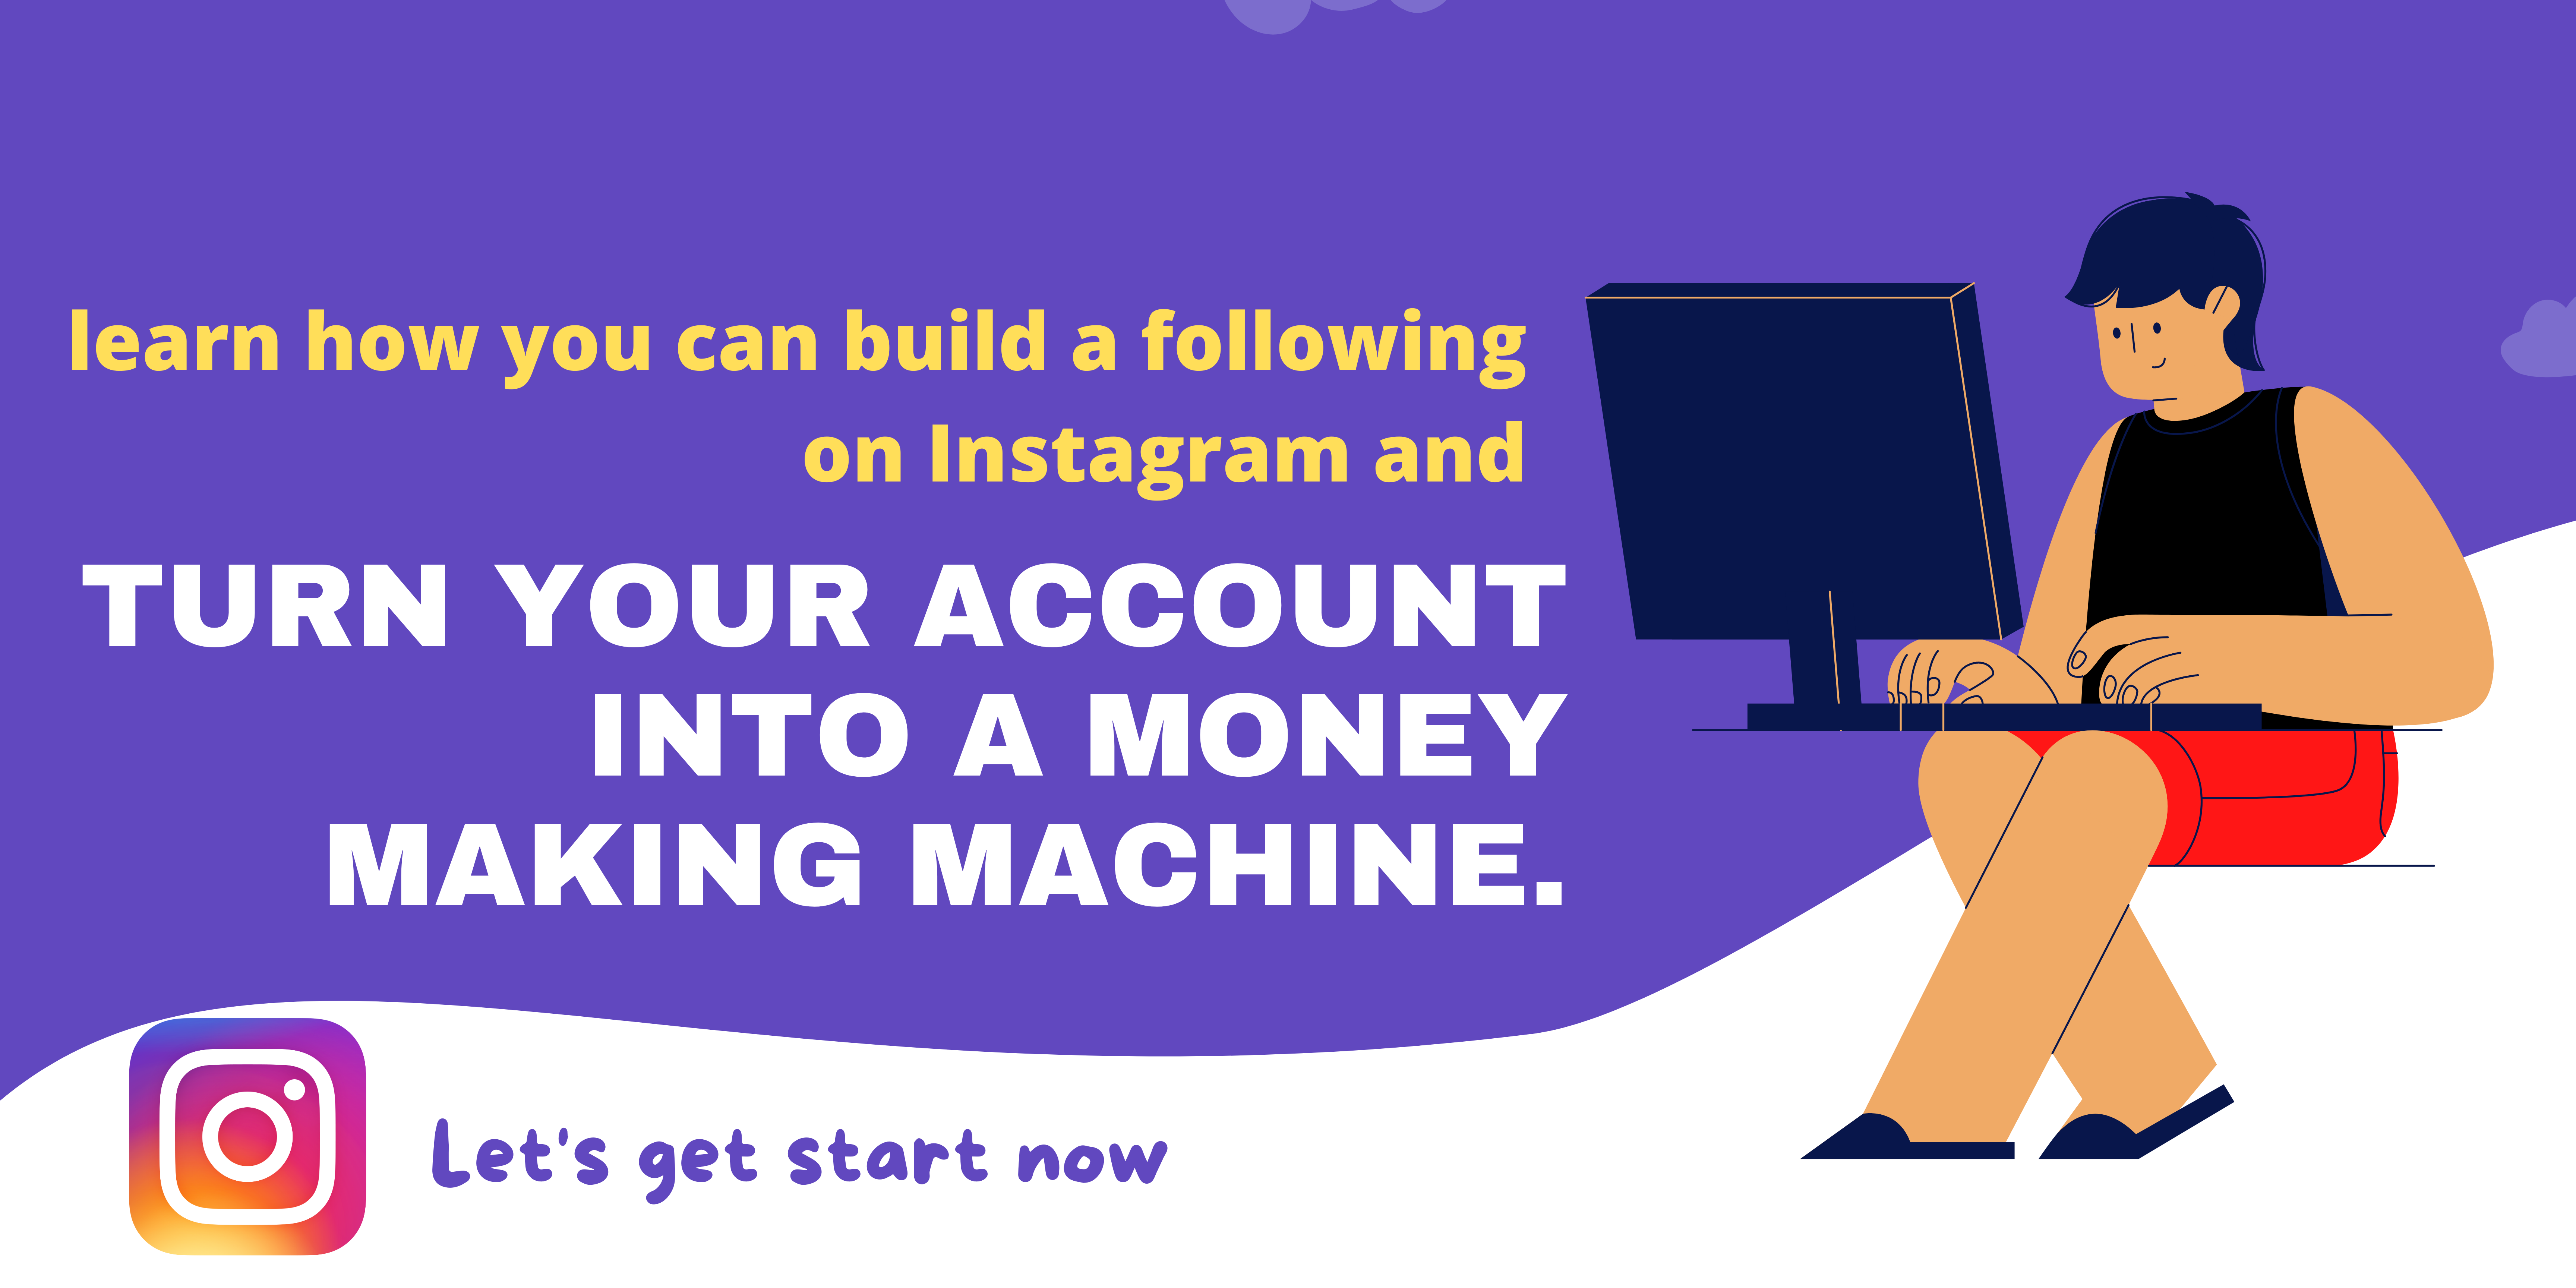 INSTAGRAM MASTERY HOW TO GROW YOUR FIRST 100K FOLLOWERS, ORGANICALLY INSTAGRAM FOLLOWERS INCREASING, MAKE MONEY WITH SOCIAL MEDIA, WORK FROM HOME, HASHTAGS, INSTAGRAM FOLLOWERS, EARNING TIPS, EARN FROM HOME, ONLINE EARN FROM HOME, 100K FOLLOWERS AND MAKE MONEY WITH INSTAGRAM, INSTAGRAM MASTERY, MAKE MONEY, ONLINE MAKING MONEY TIPS,